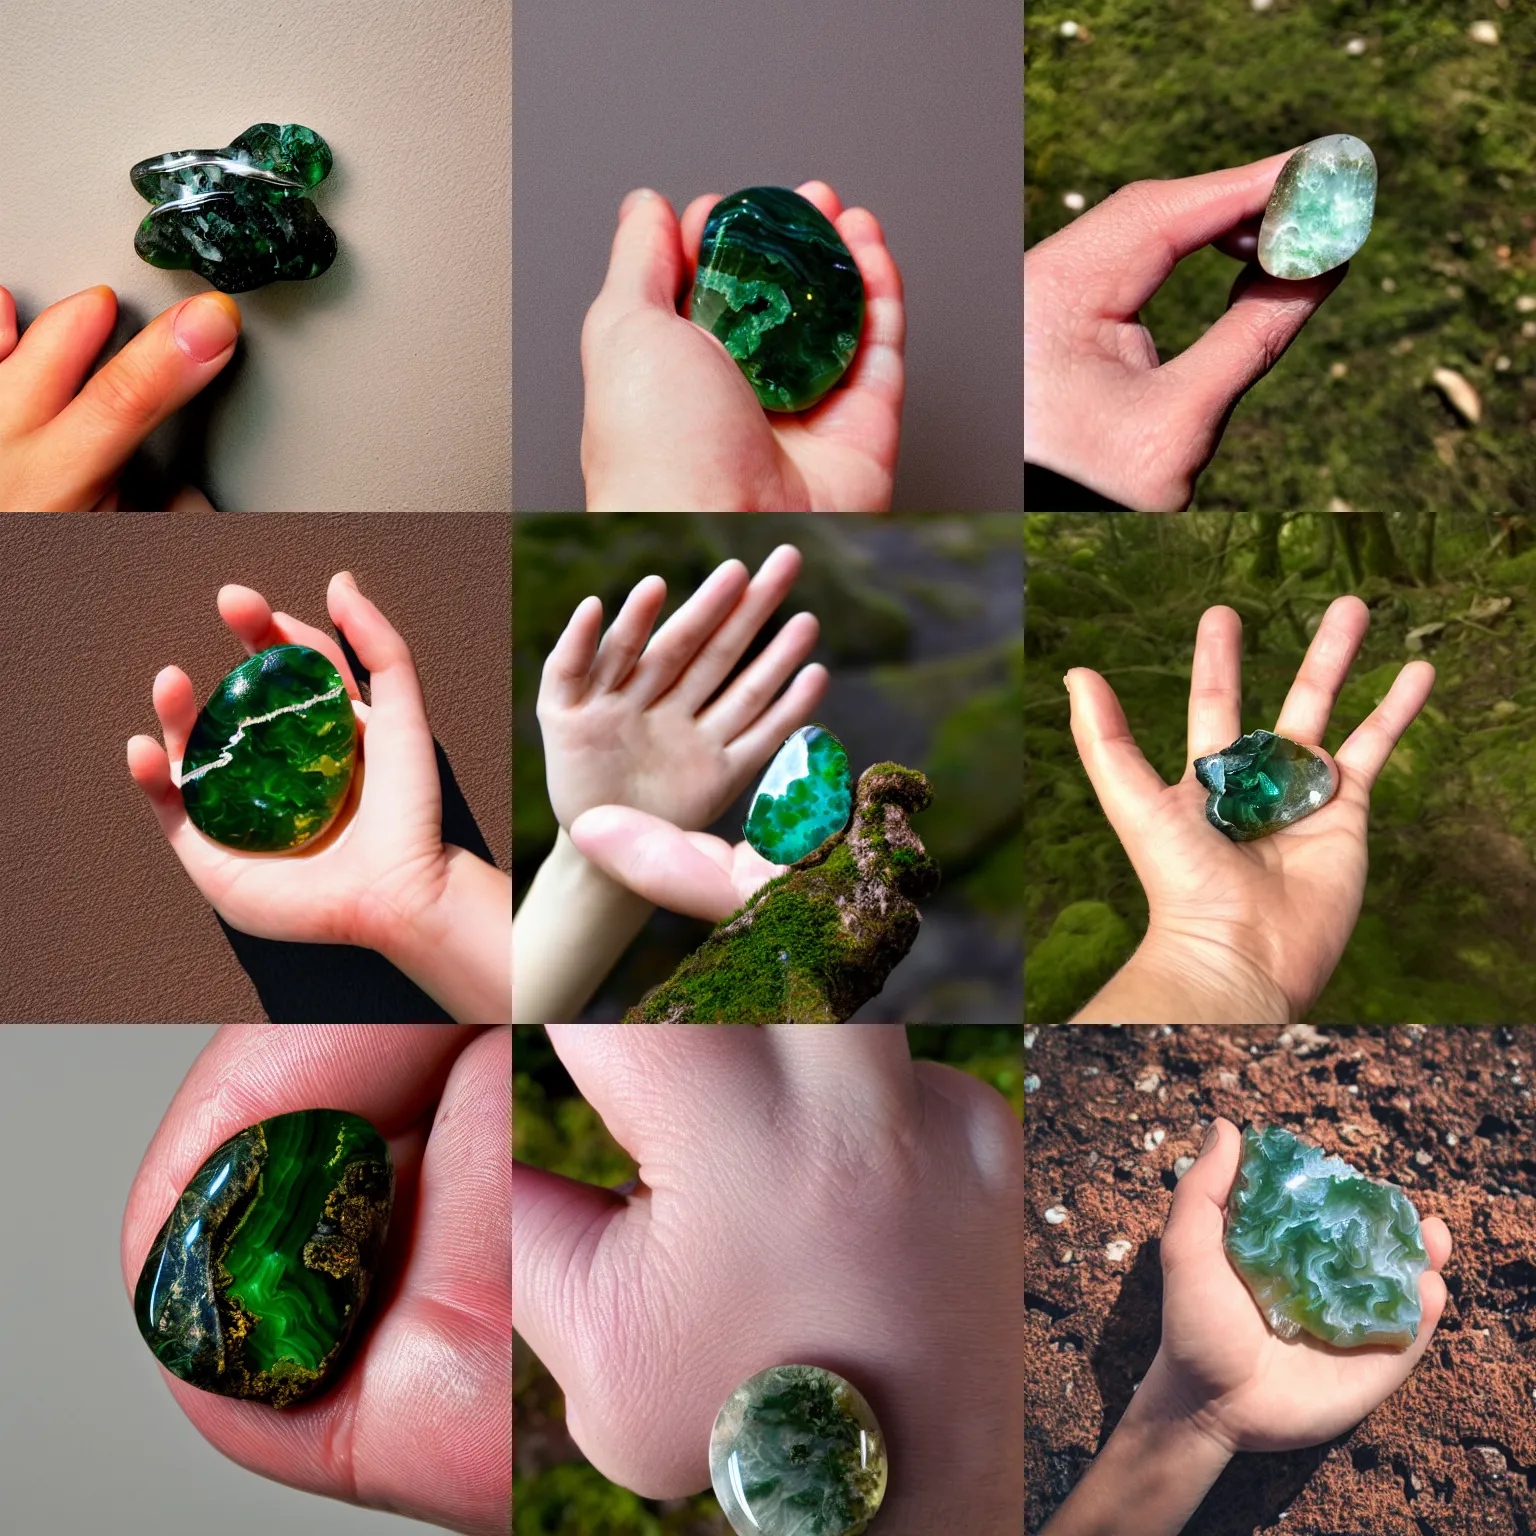 Prompt: hand photography, discernible hand with thumb and 4 fingers, holding a moss agate